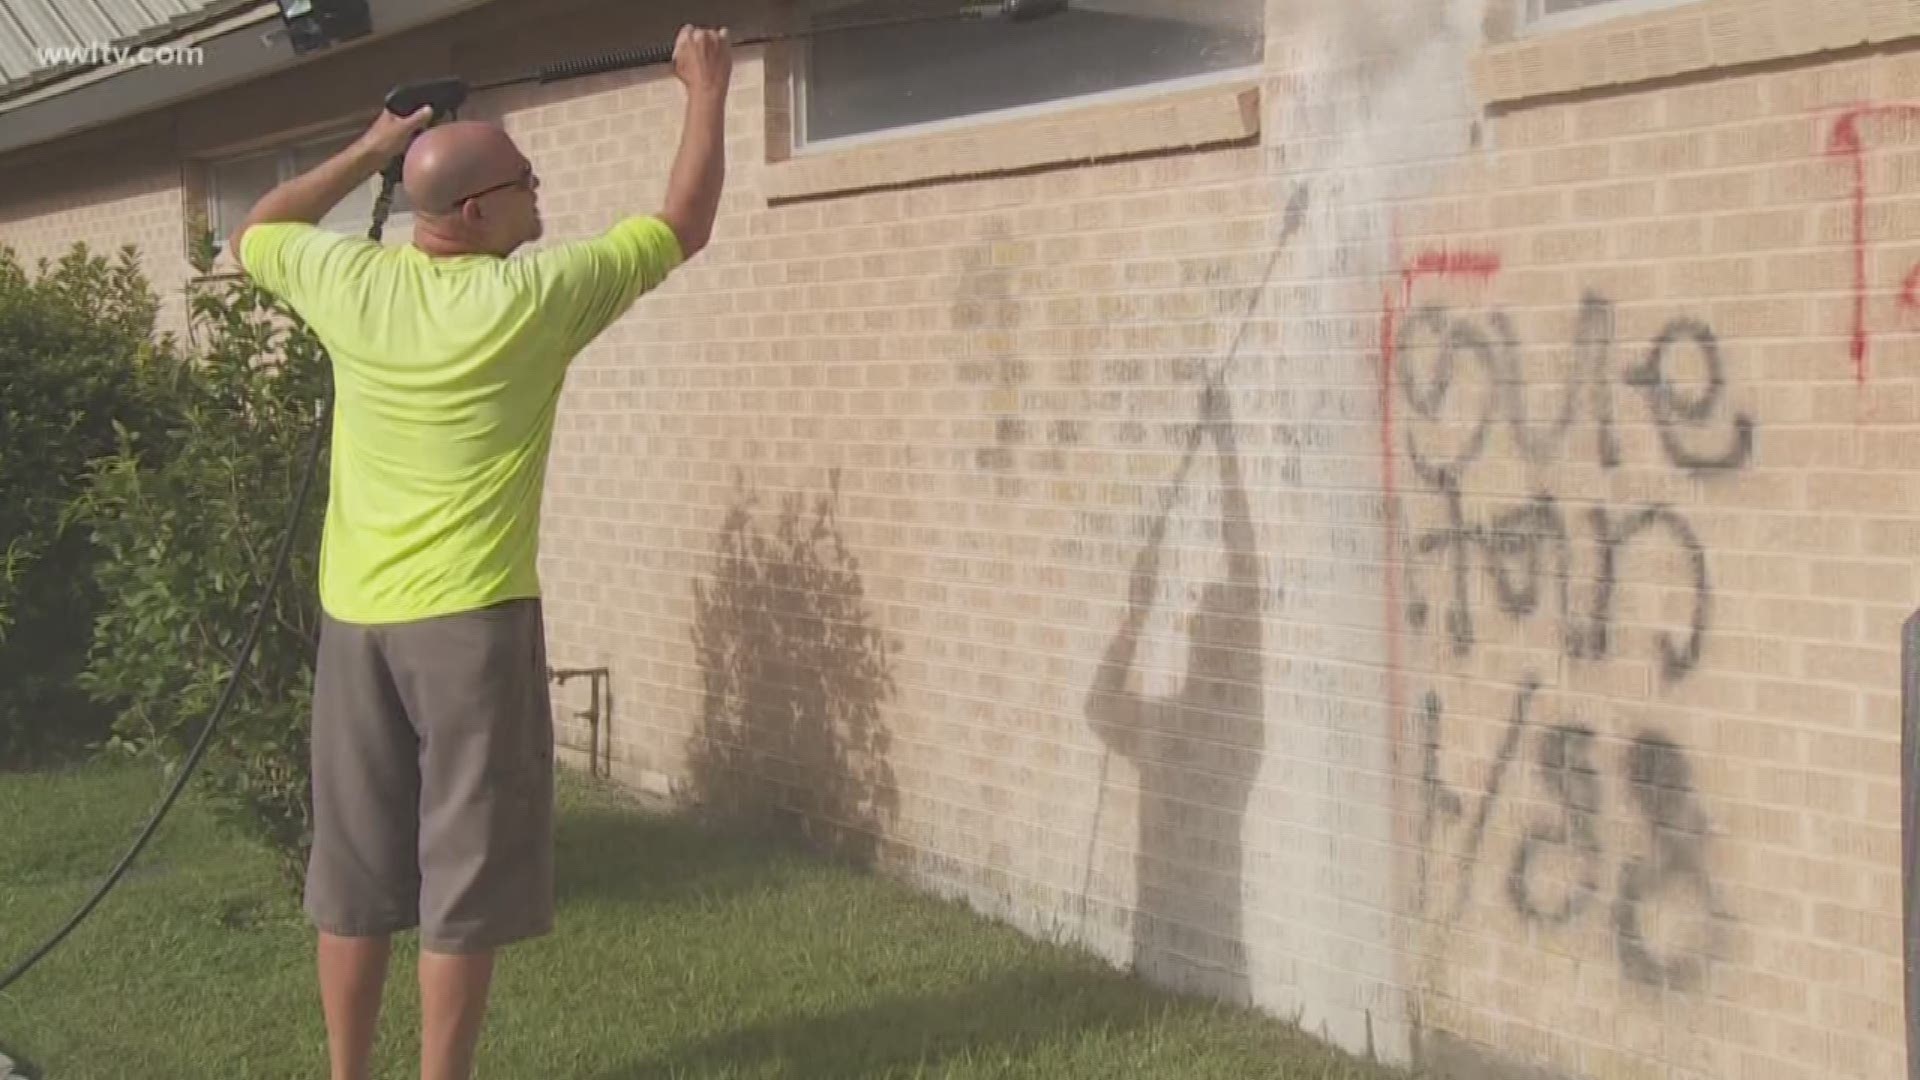 Thursday, members of the Northshore Jewish Congregation were greeted with anti-Semetic symbols spray painted on the back wall of their building. The graffiti included swastikas and the words "synagogue of satan 14/88.